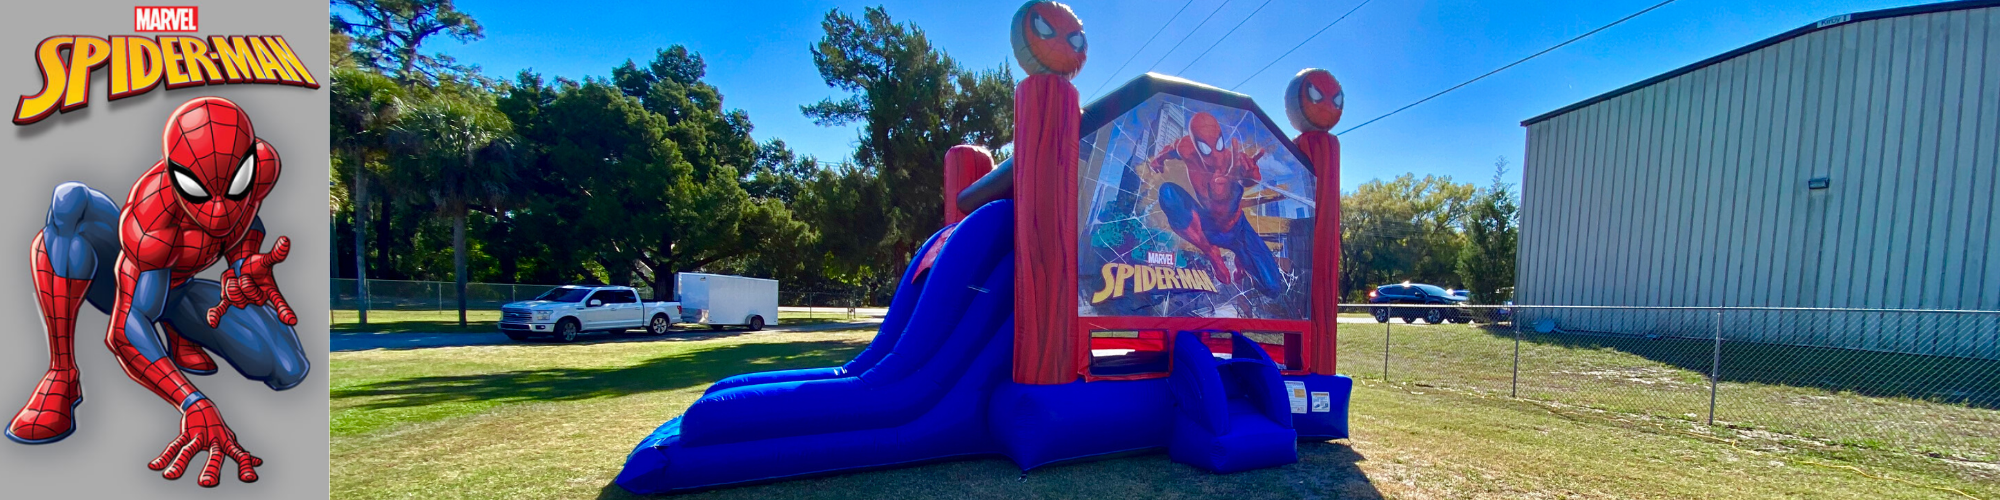 Spiderman Themed Inflatable